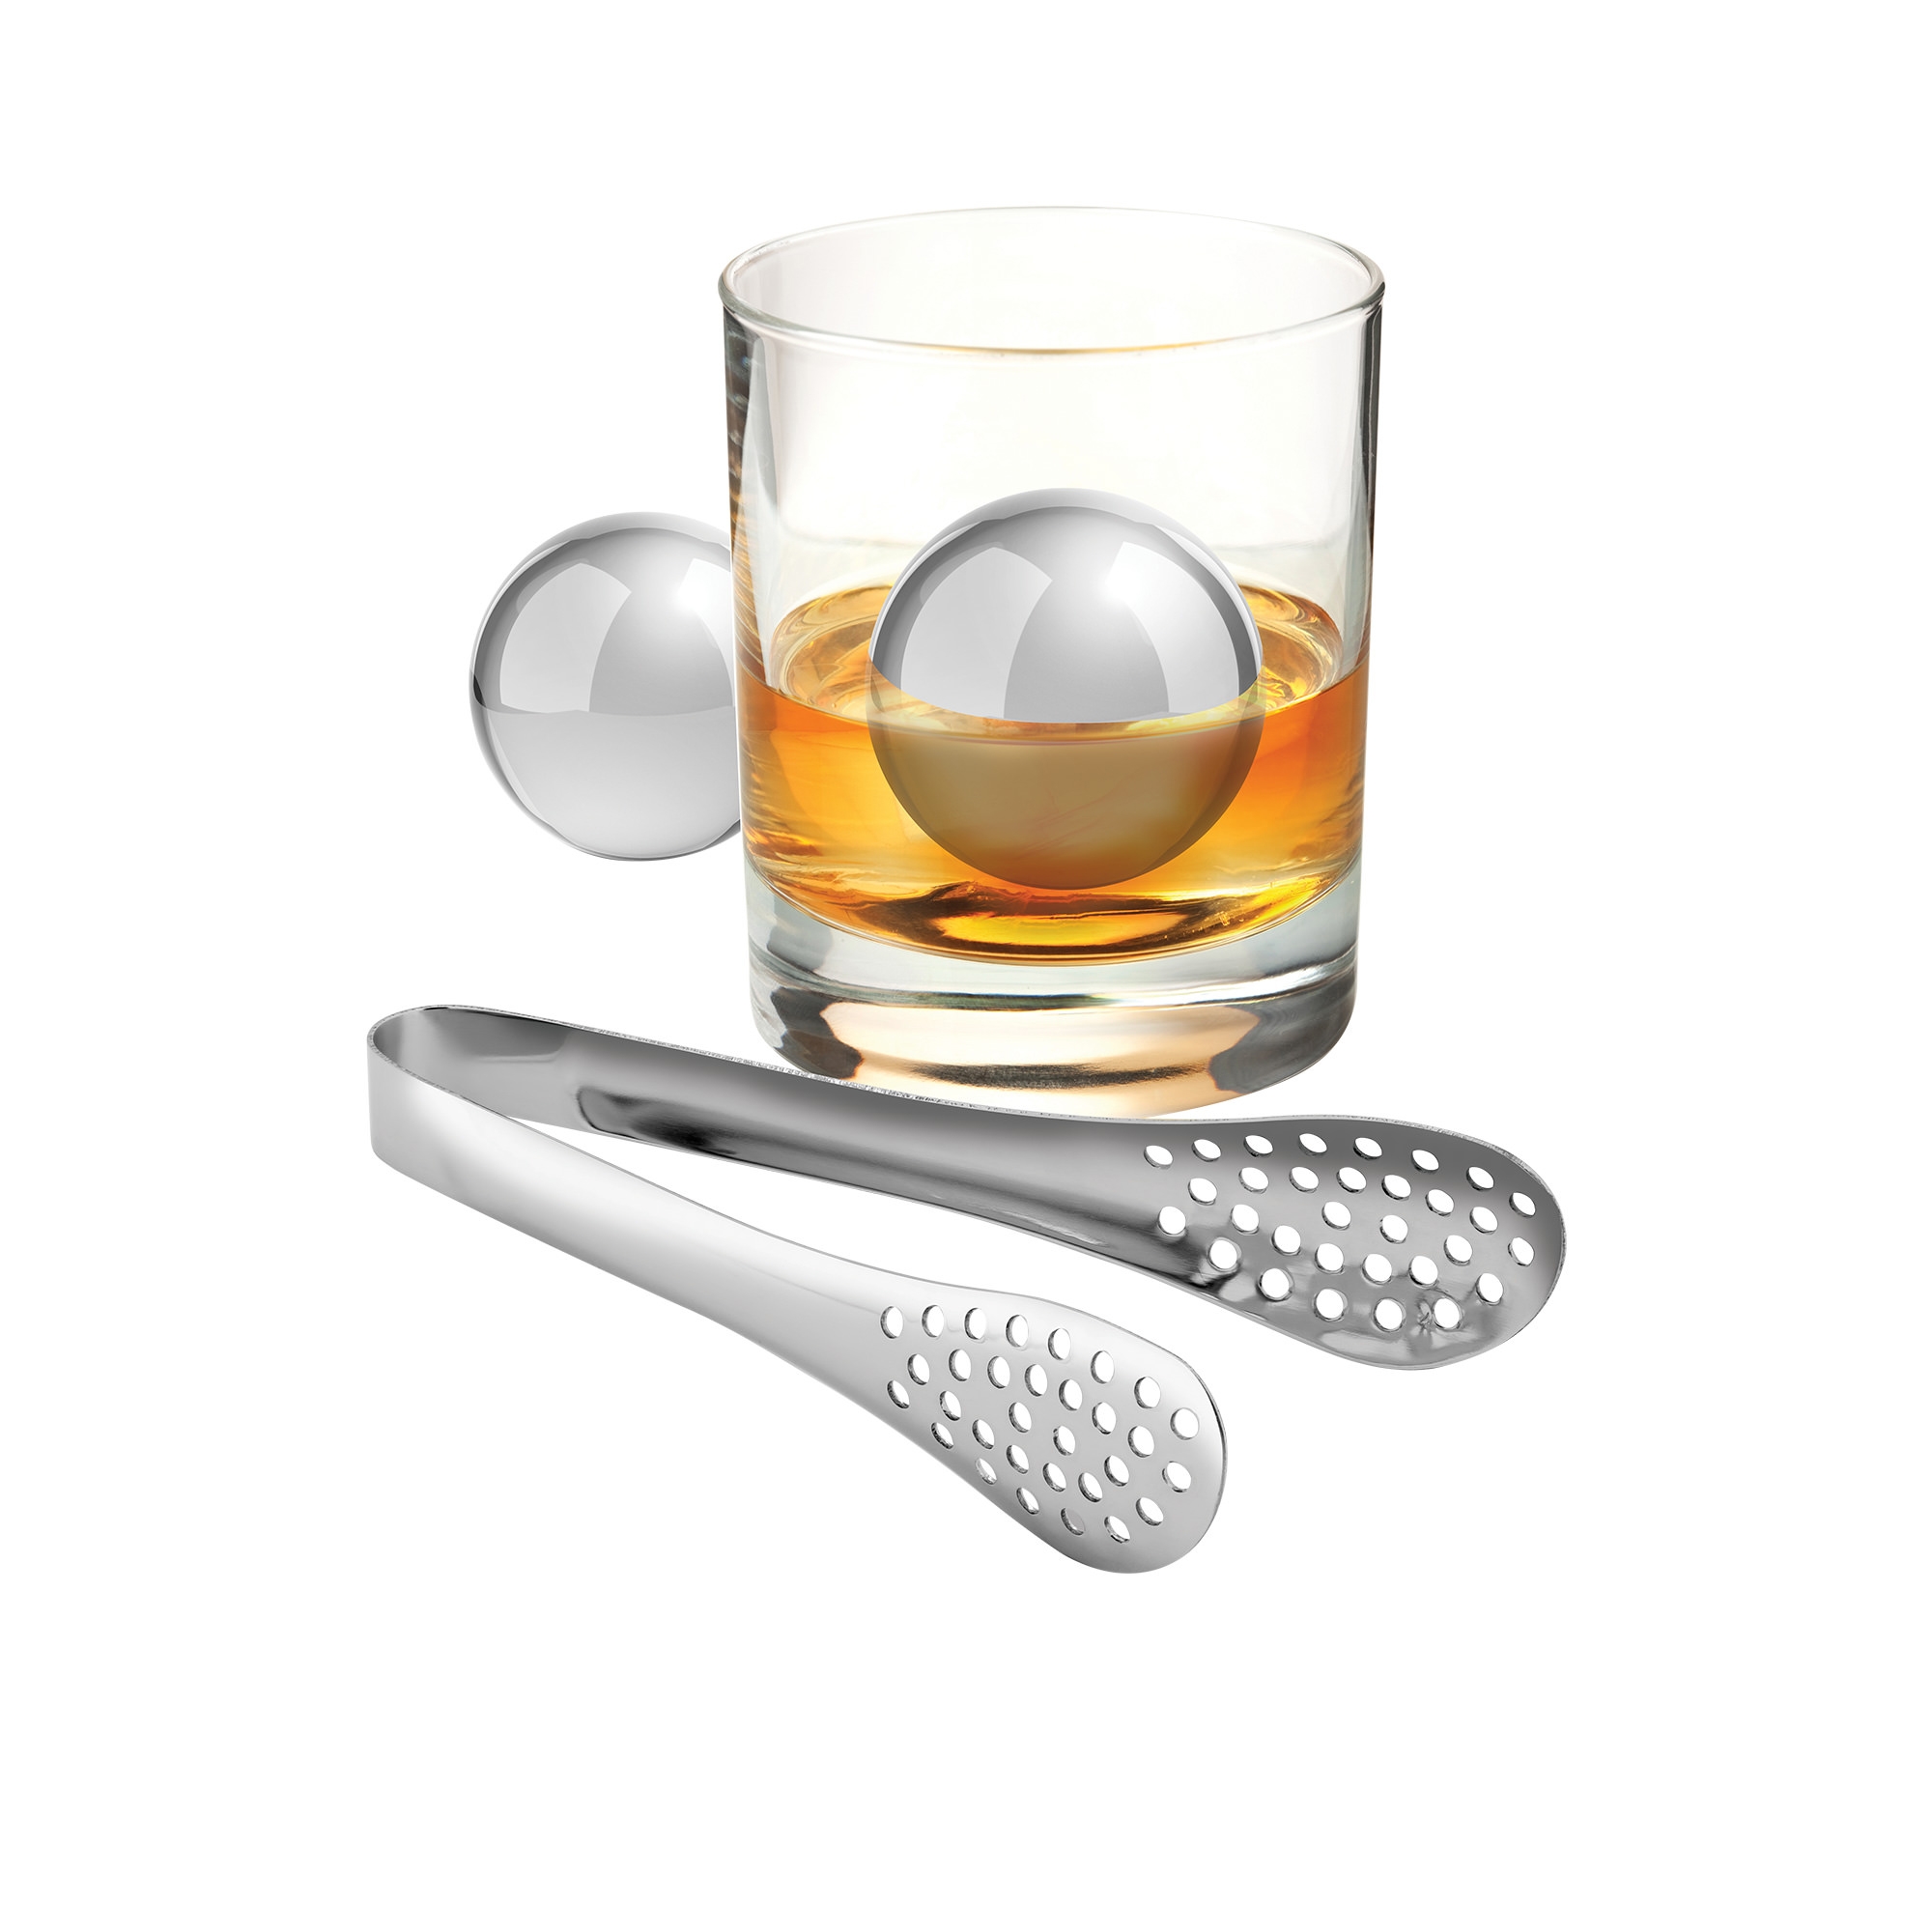 Avanti Stainless Steel Ice Ball and Tongs Set Image 1